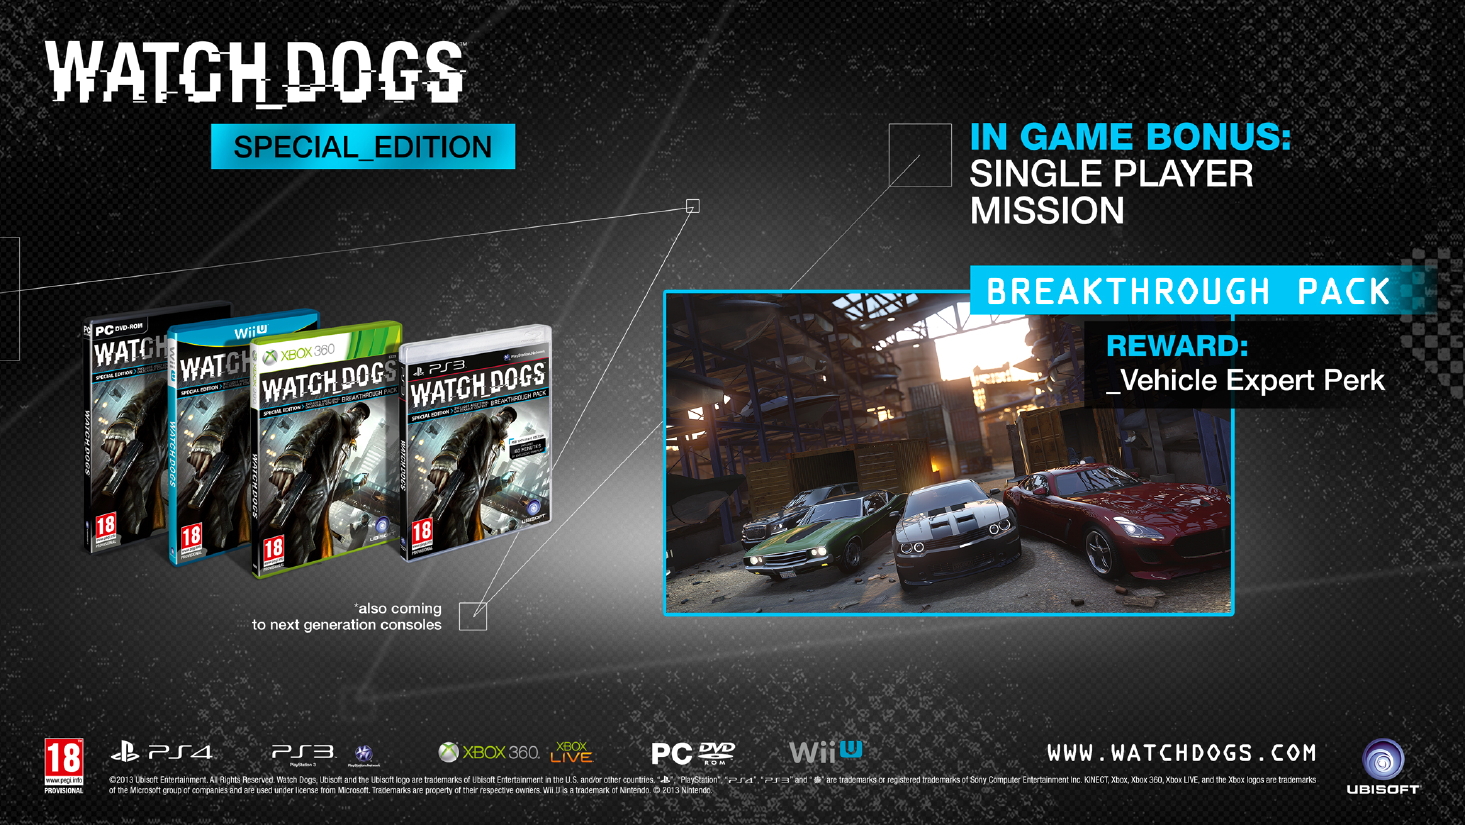 Watch Dogs: Breakthrough Pack DLC - CD Key for Uplay